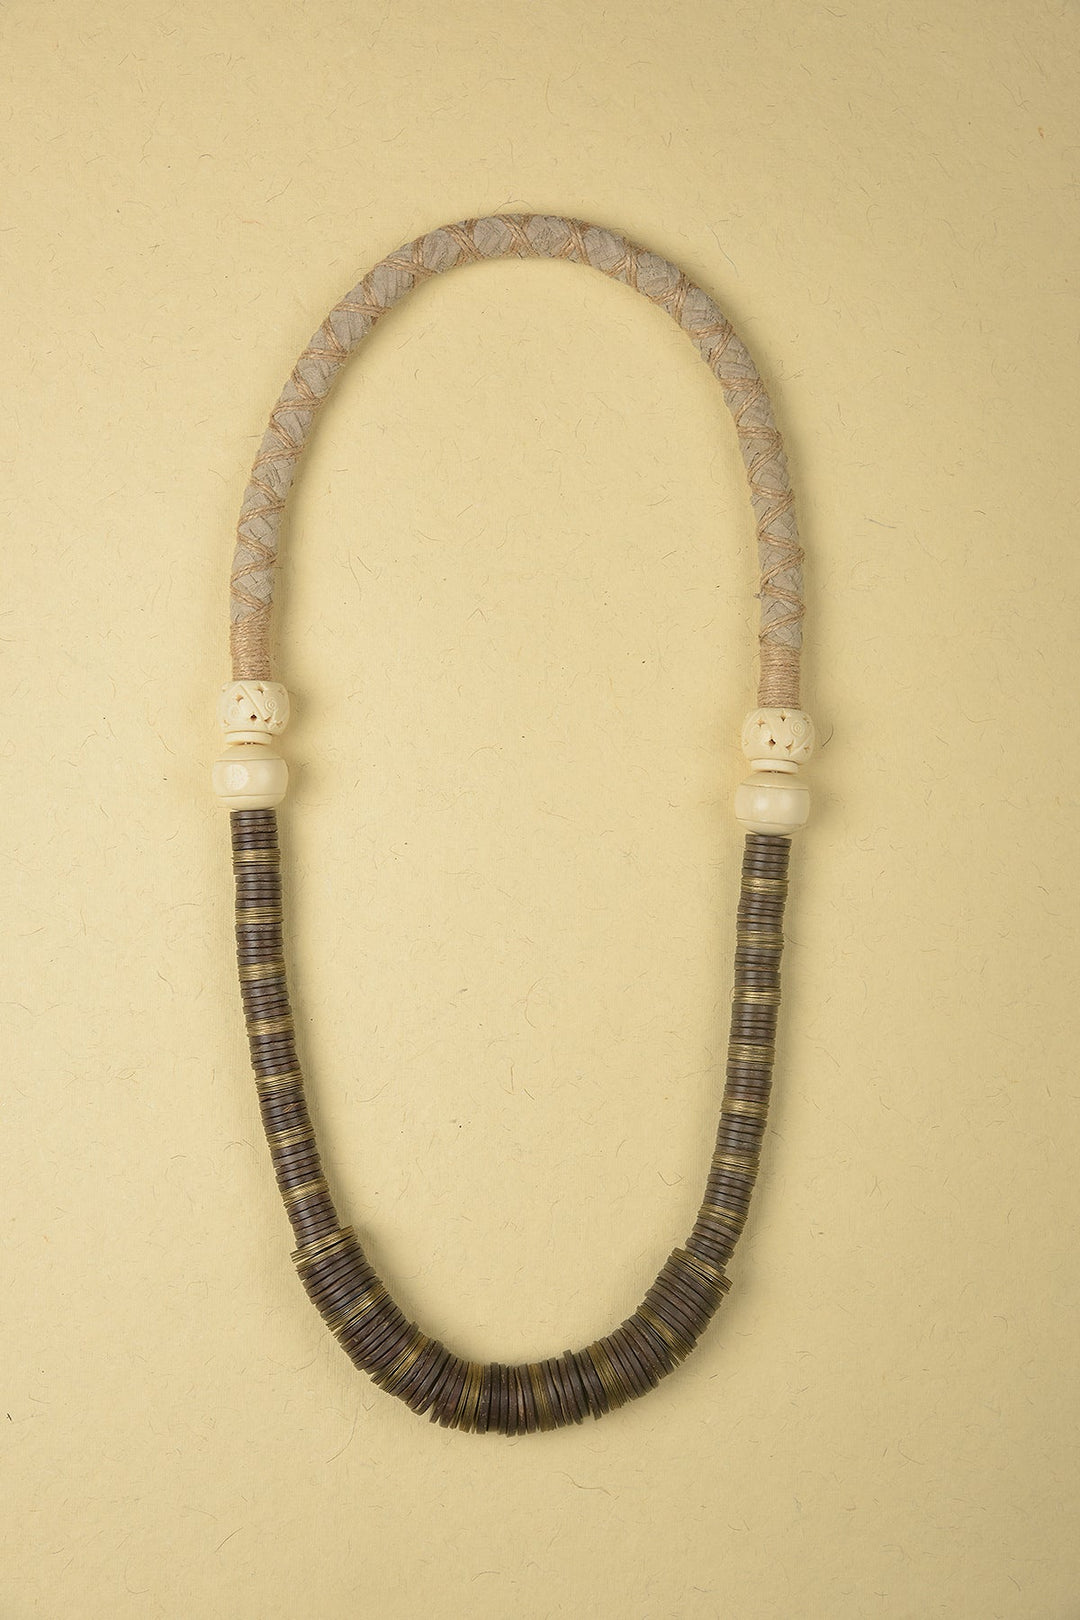 Necklace made of Jute, Suede, Bones and Iron Rings